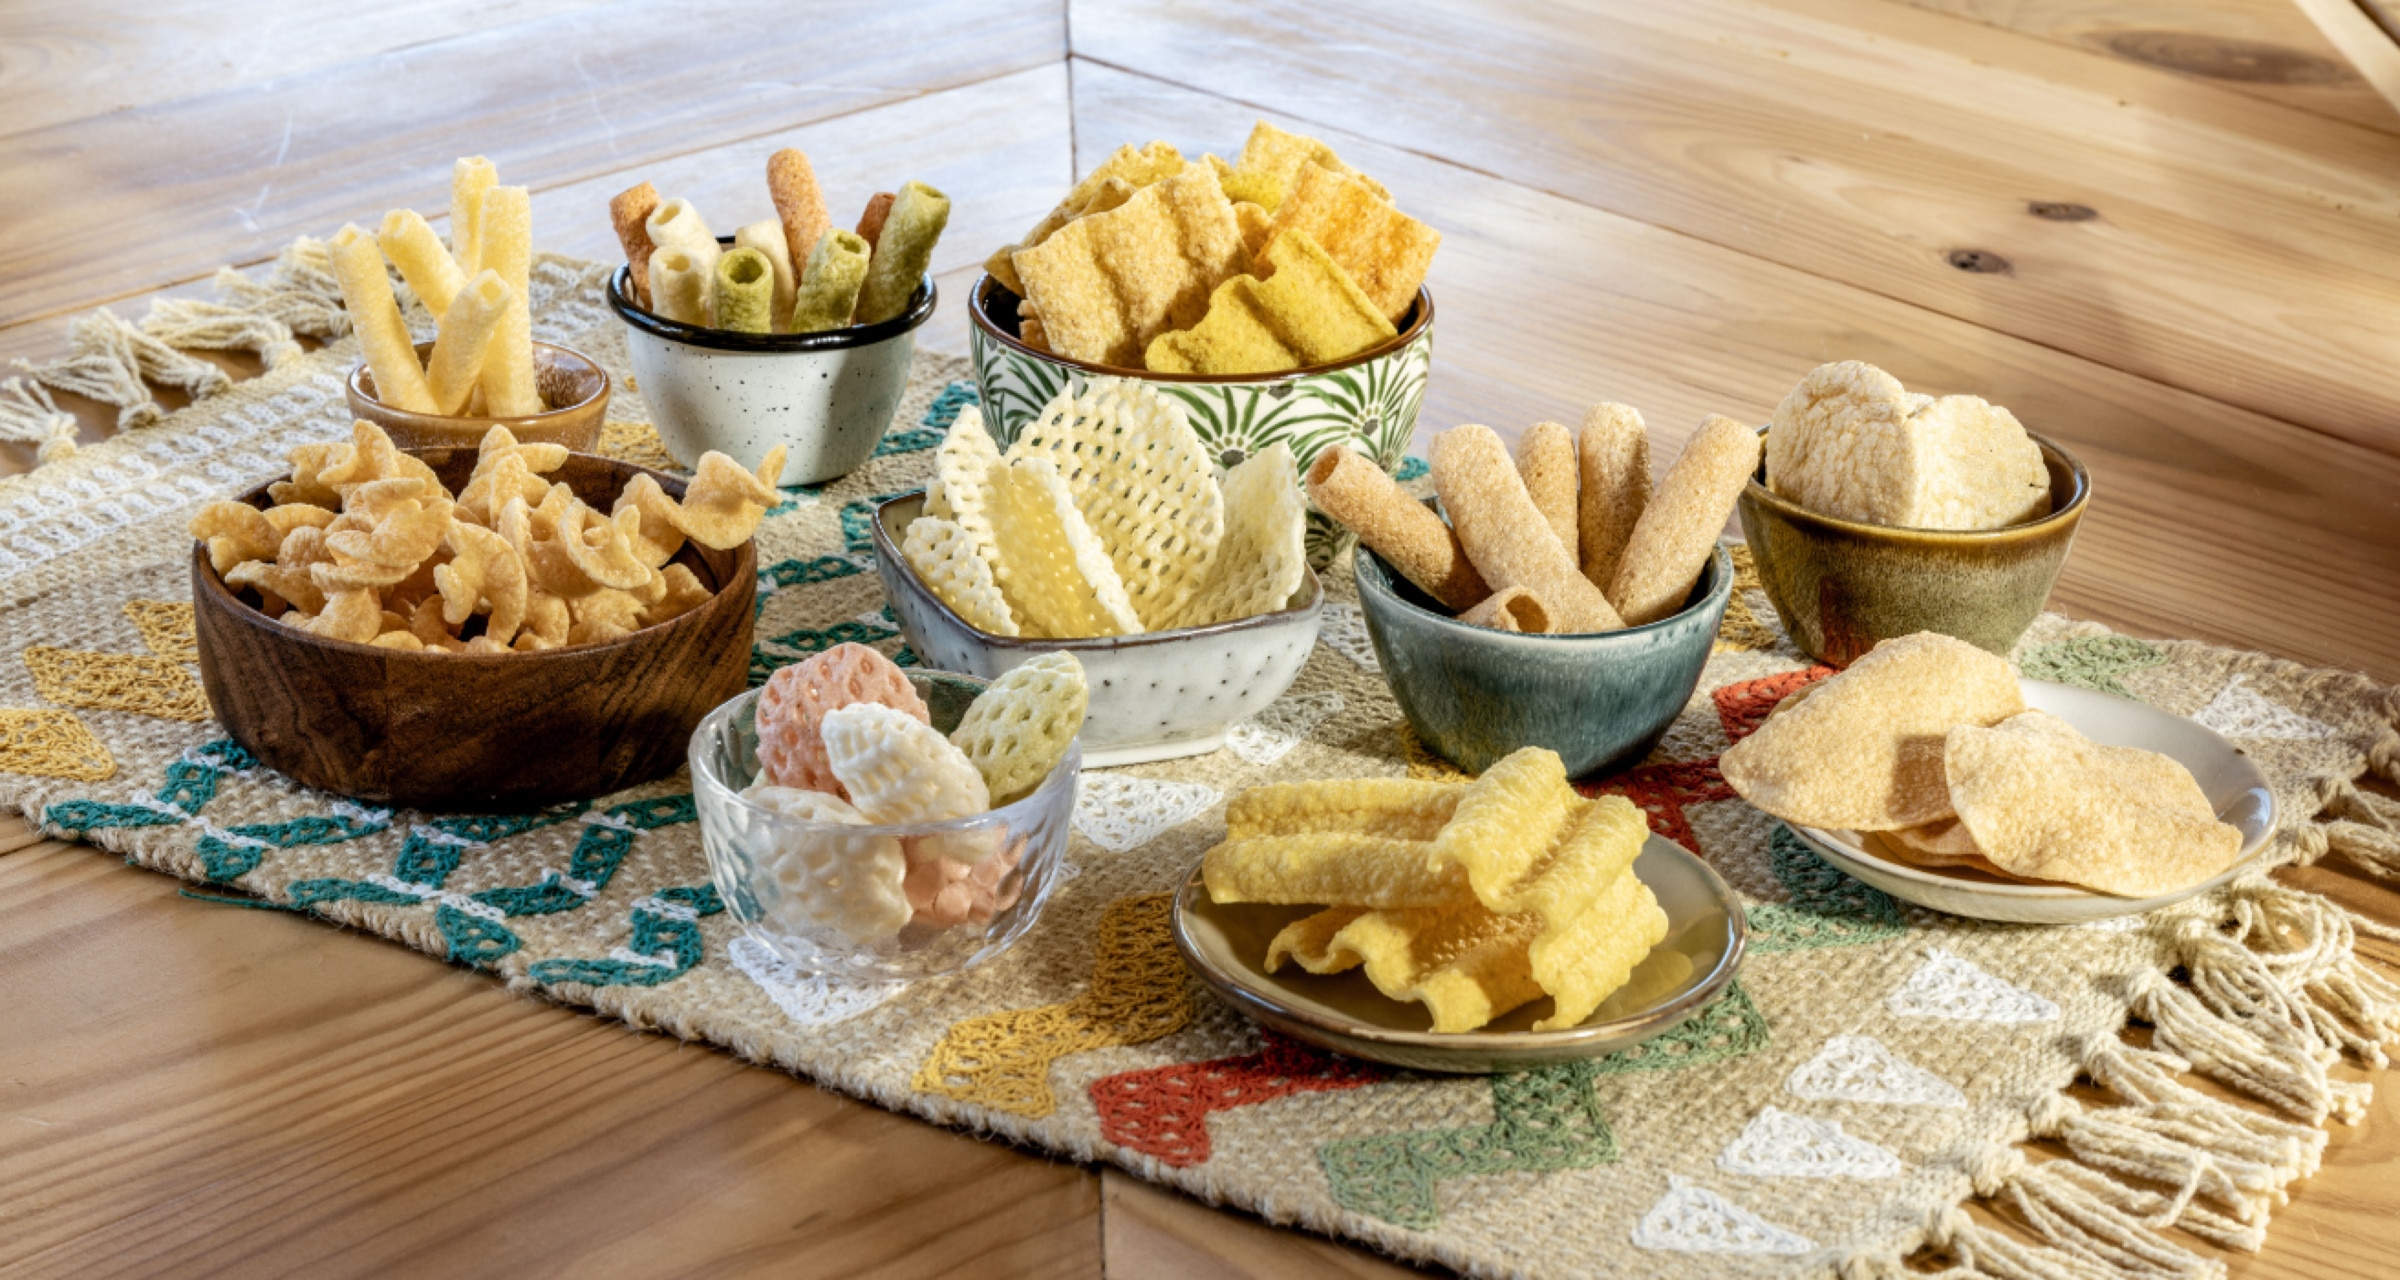 Several types of chips and snacks on little plates and bowls are displayed on colorful woven placemat atop a wooden table.